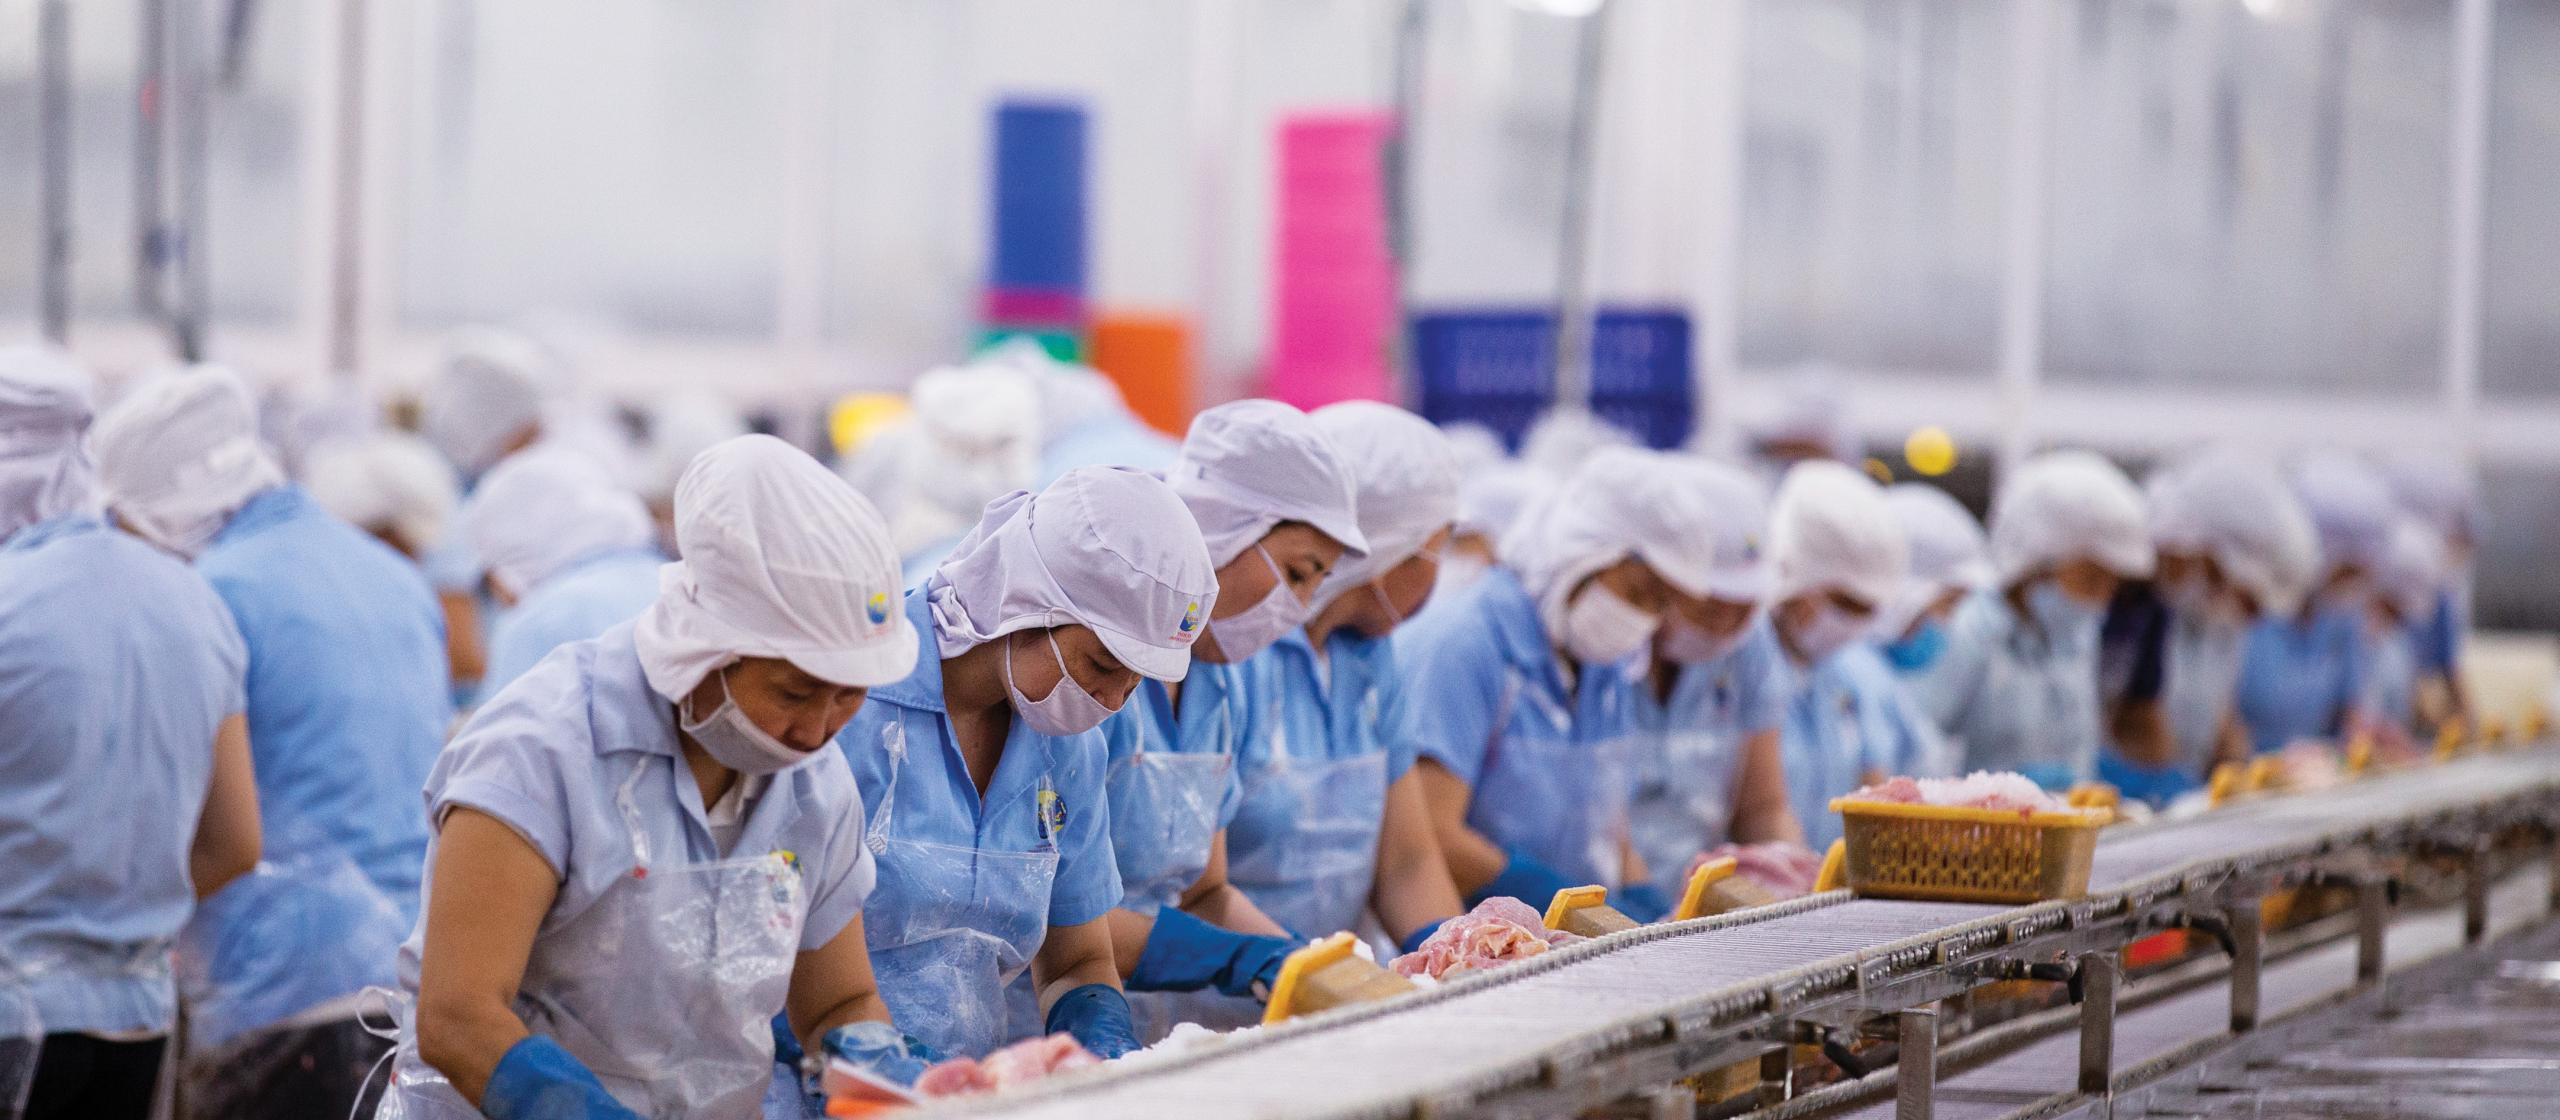 workers processing catfish wearing blue uniforms and white hairnets